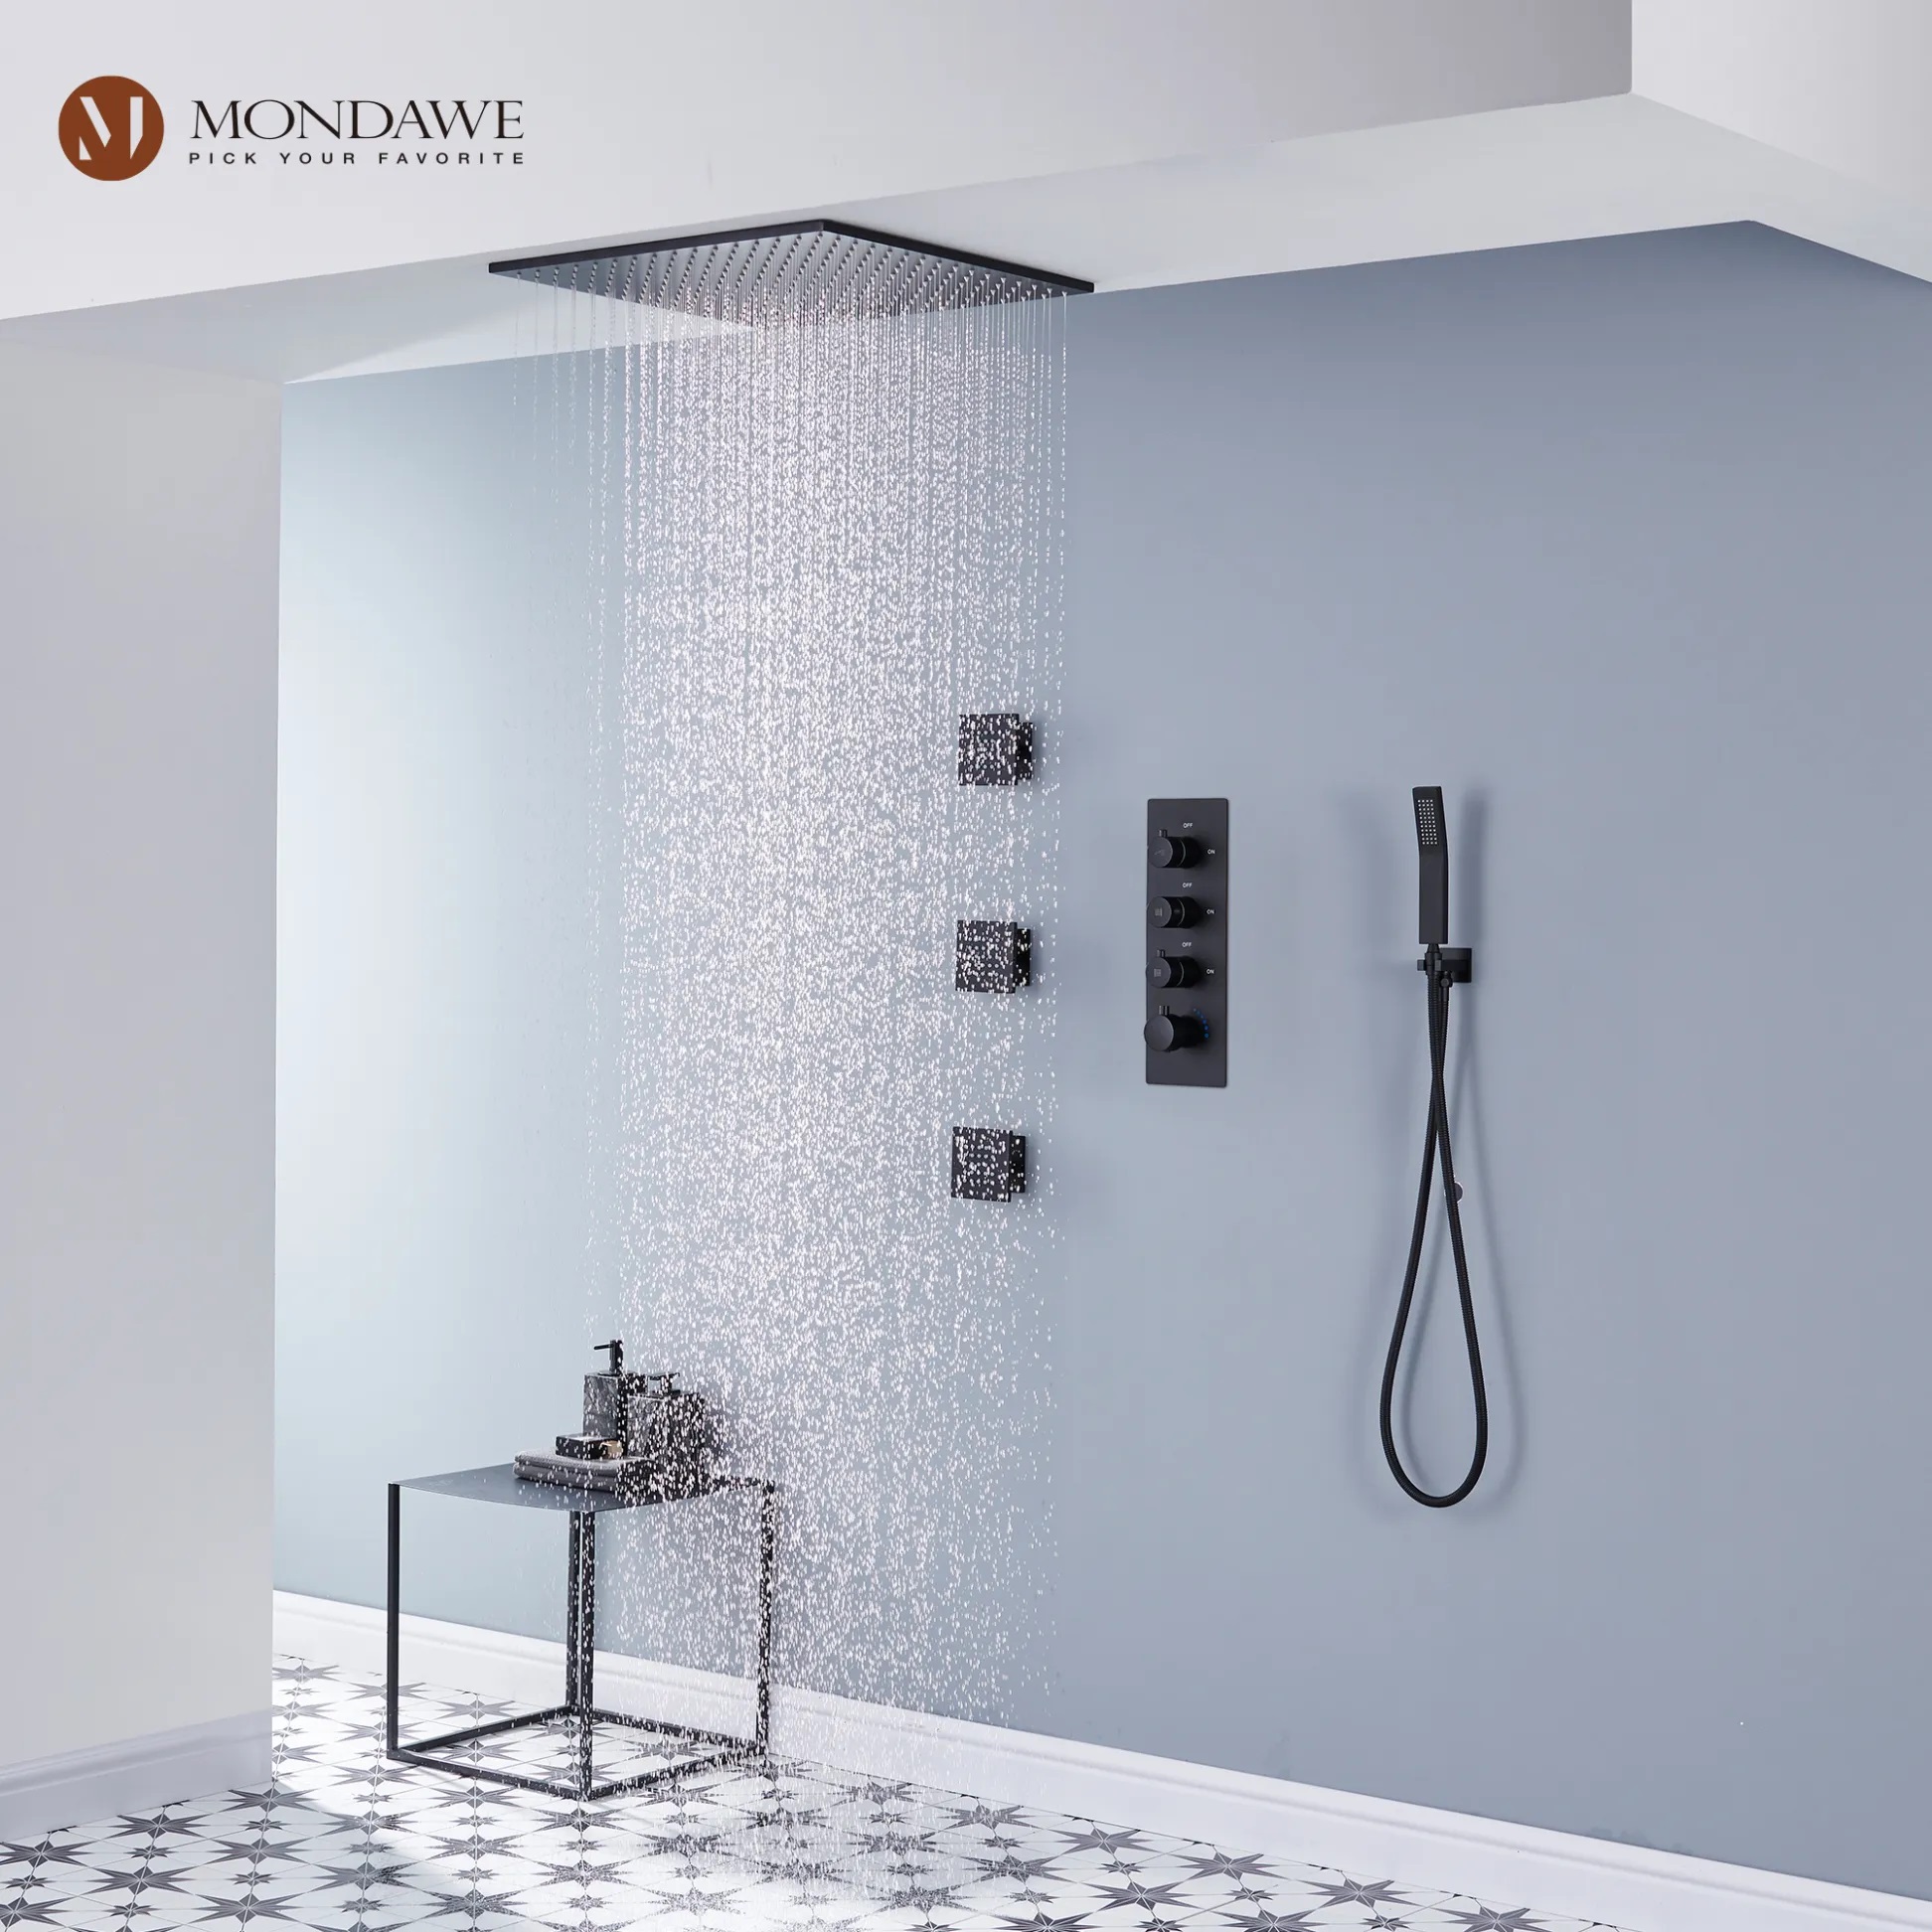 spa-like experience from ceiling mounted shower system